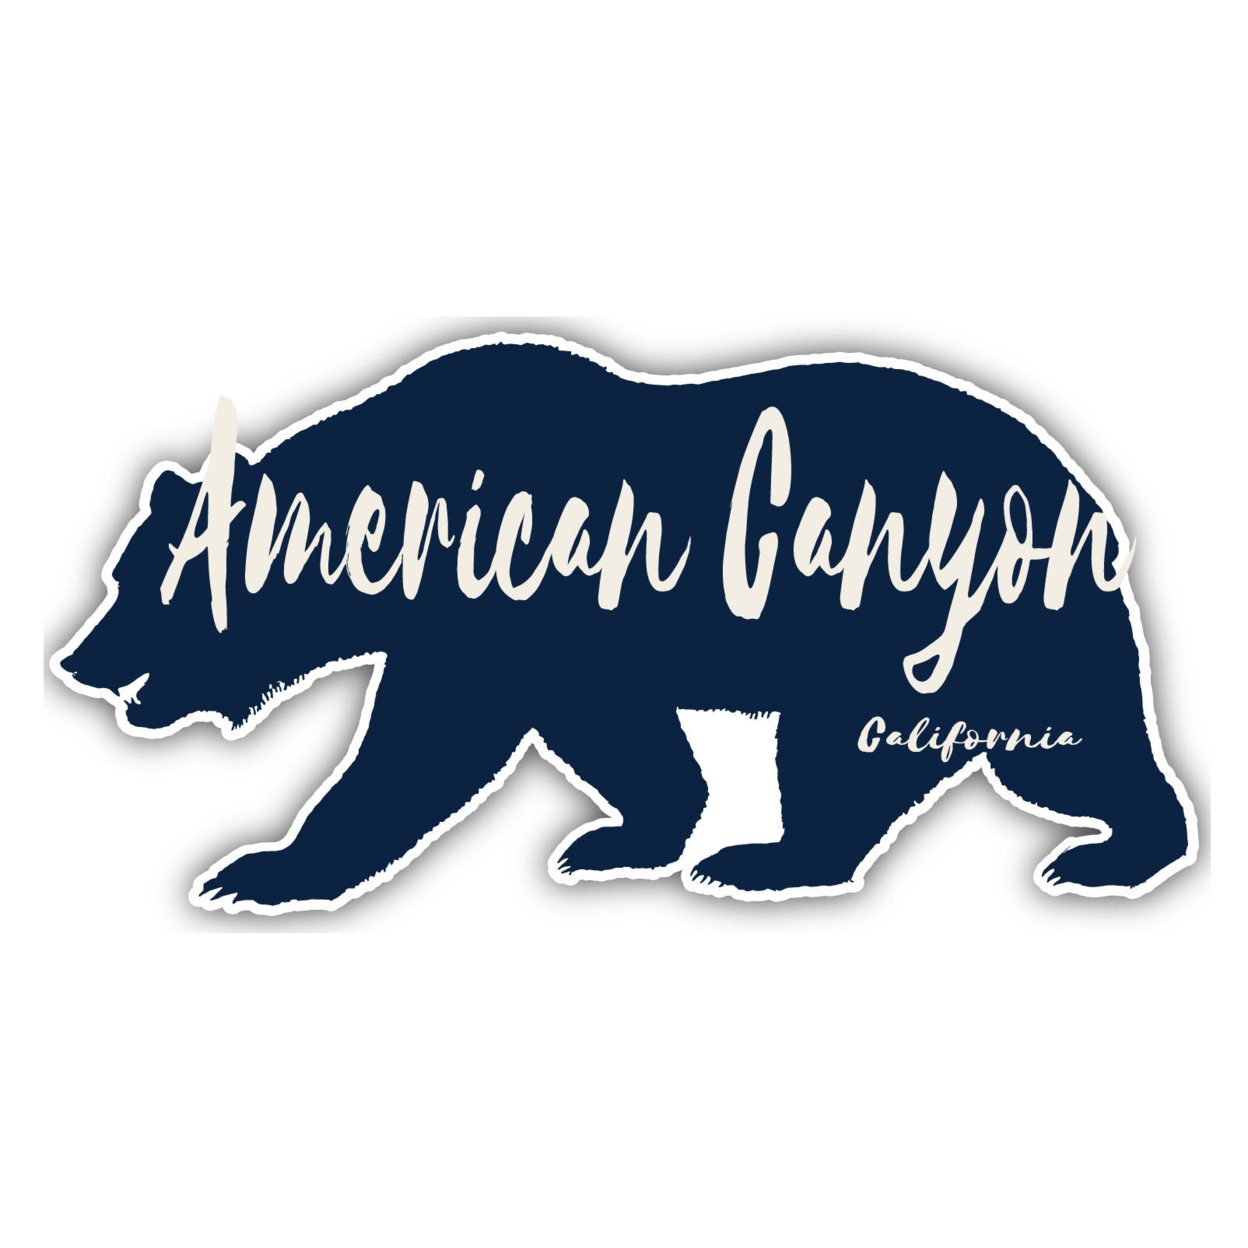 American Canyon California Souvenir Decorative Stickers (Choose Theme And Size) - 4-Pack, 6-Inch, Bear